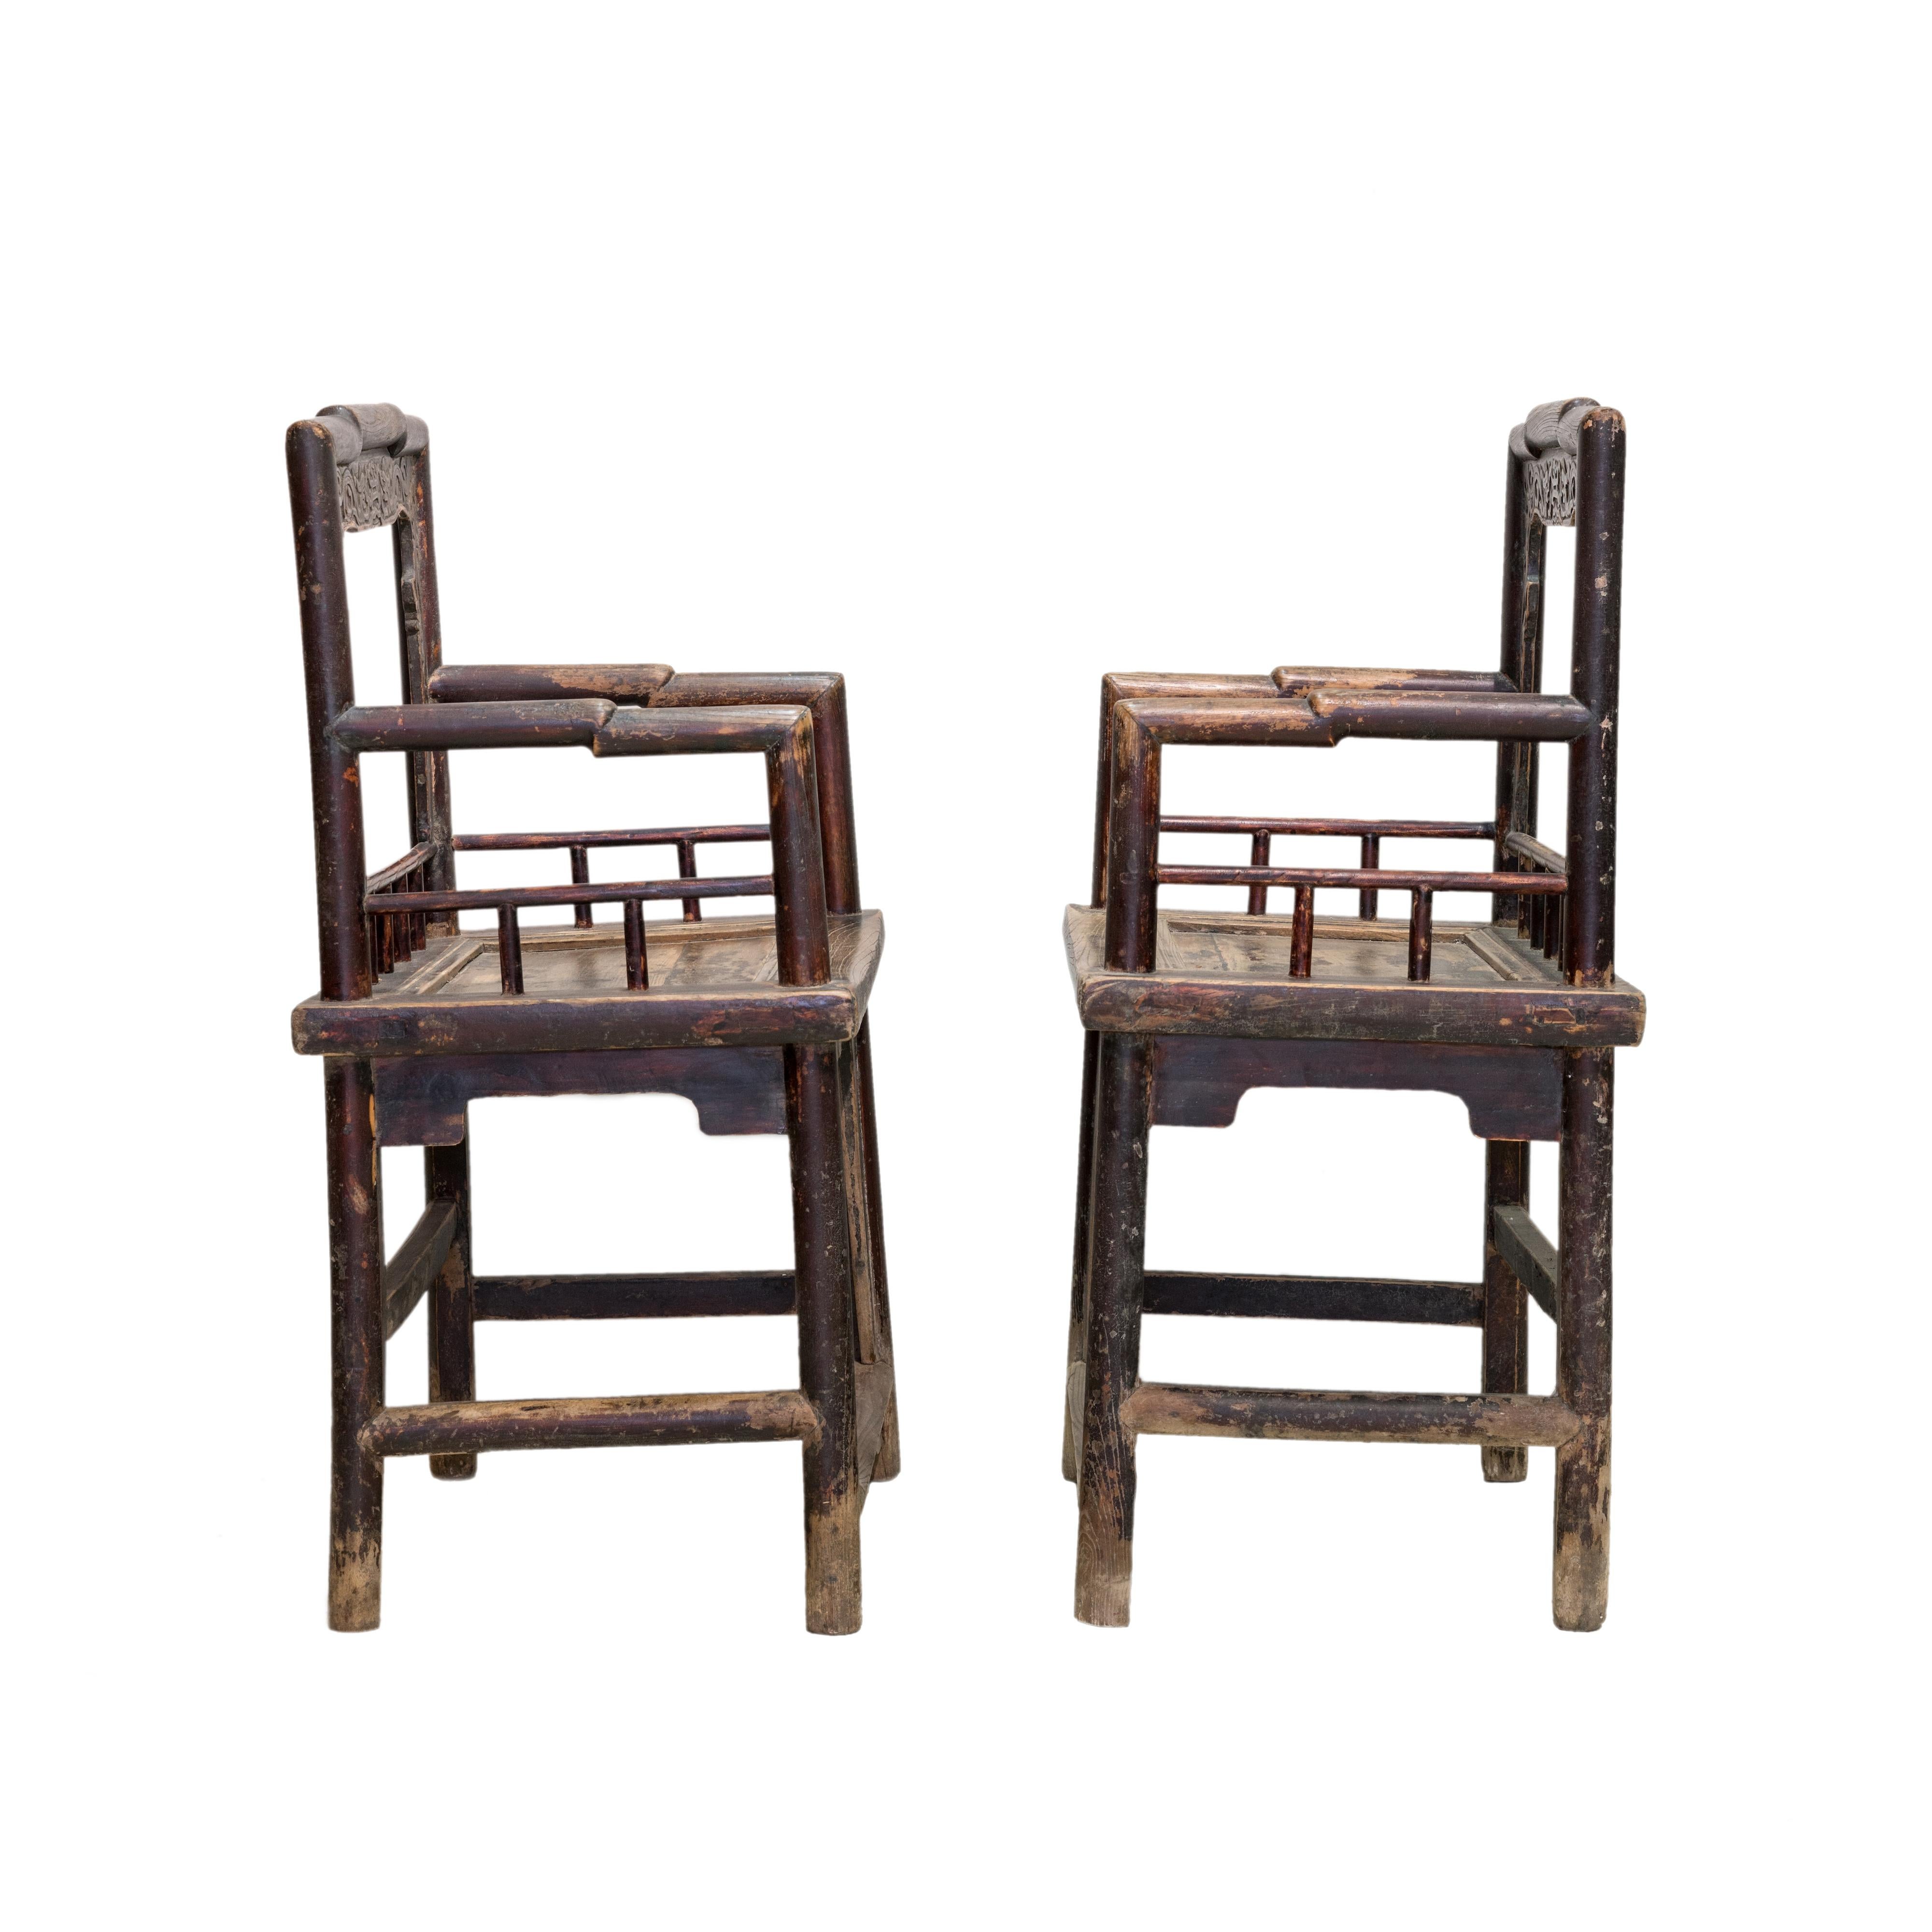 A pair of elmwood rose armchairs from northern China. Solid rounded framework with an interesting 